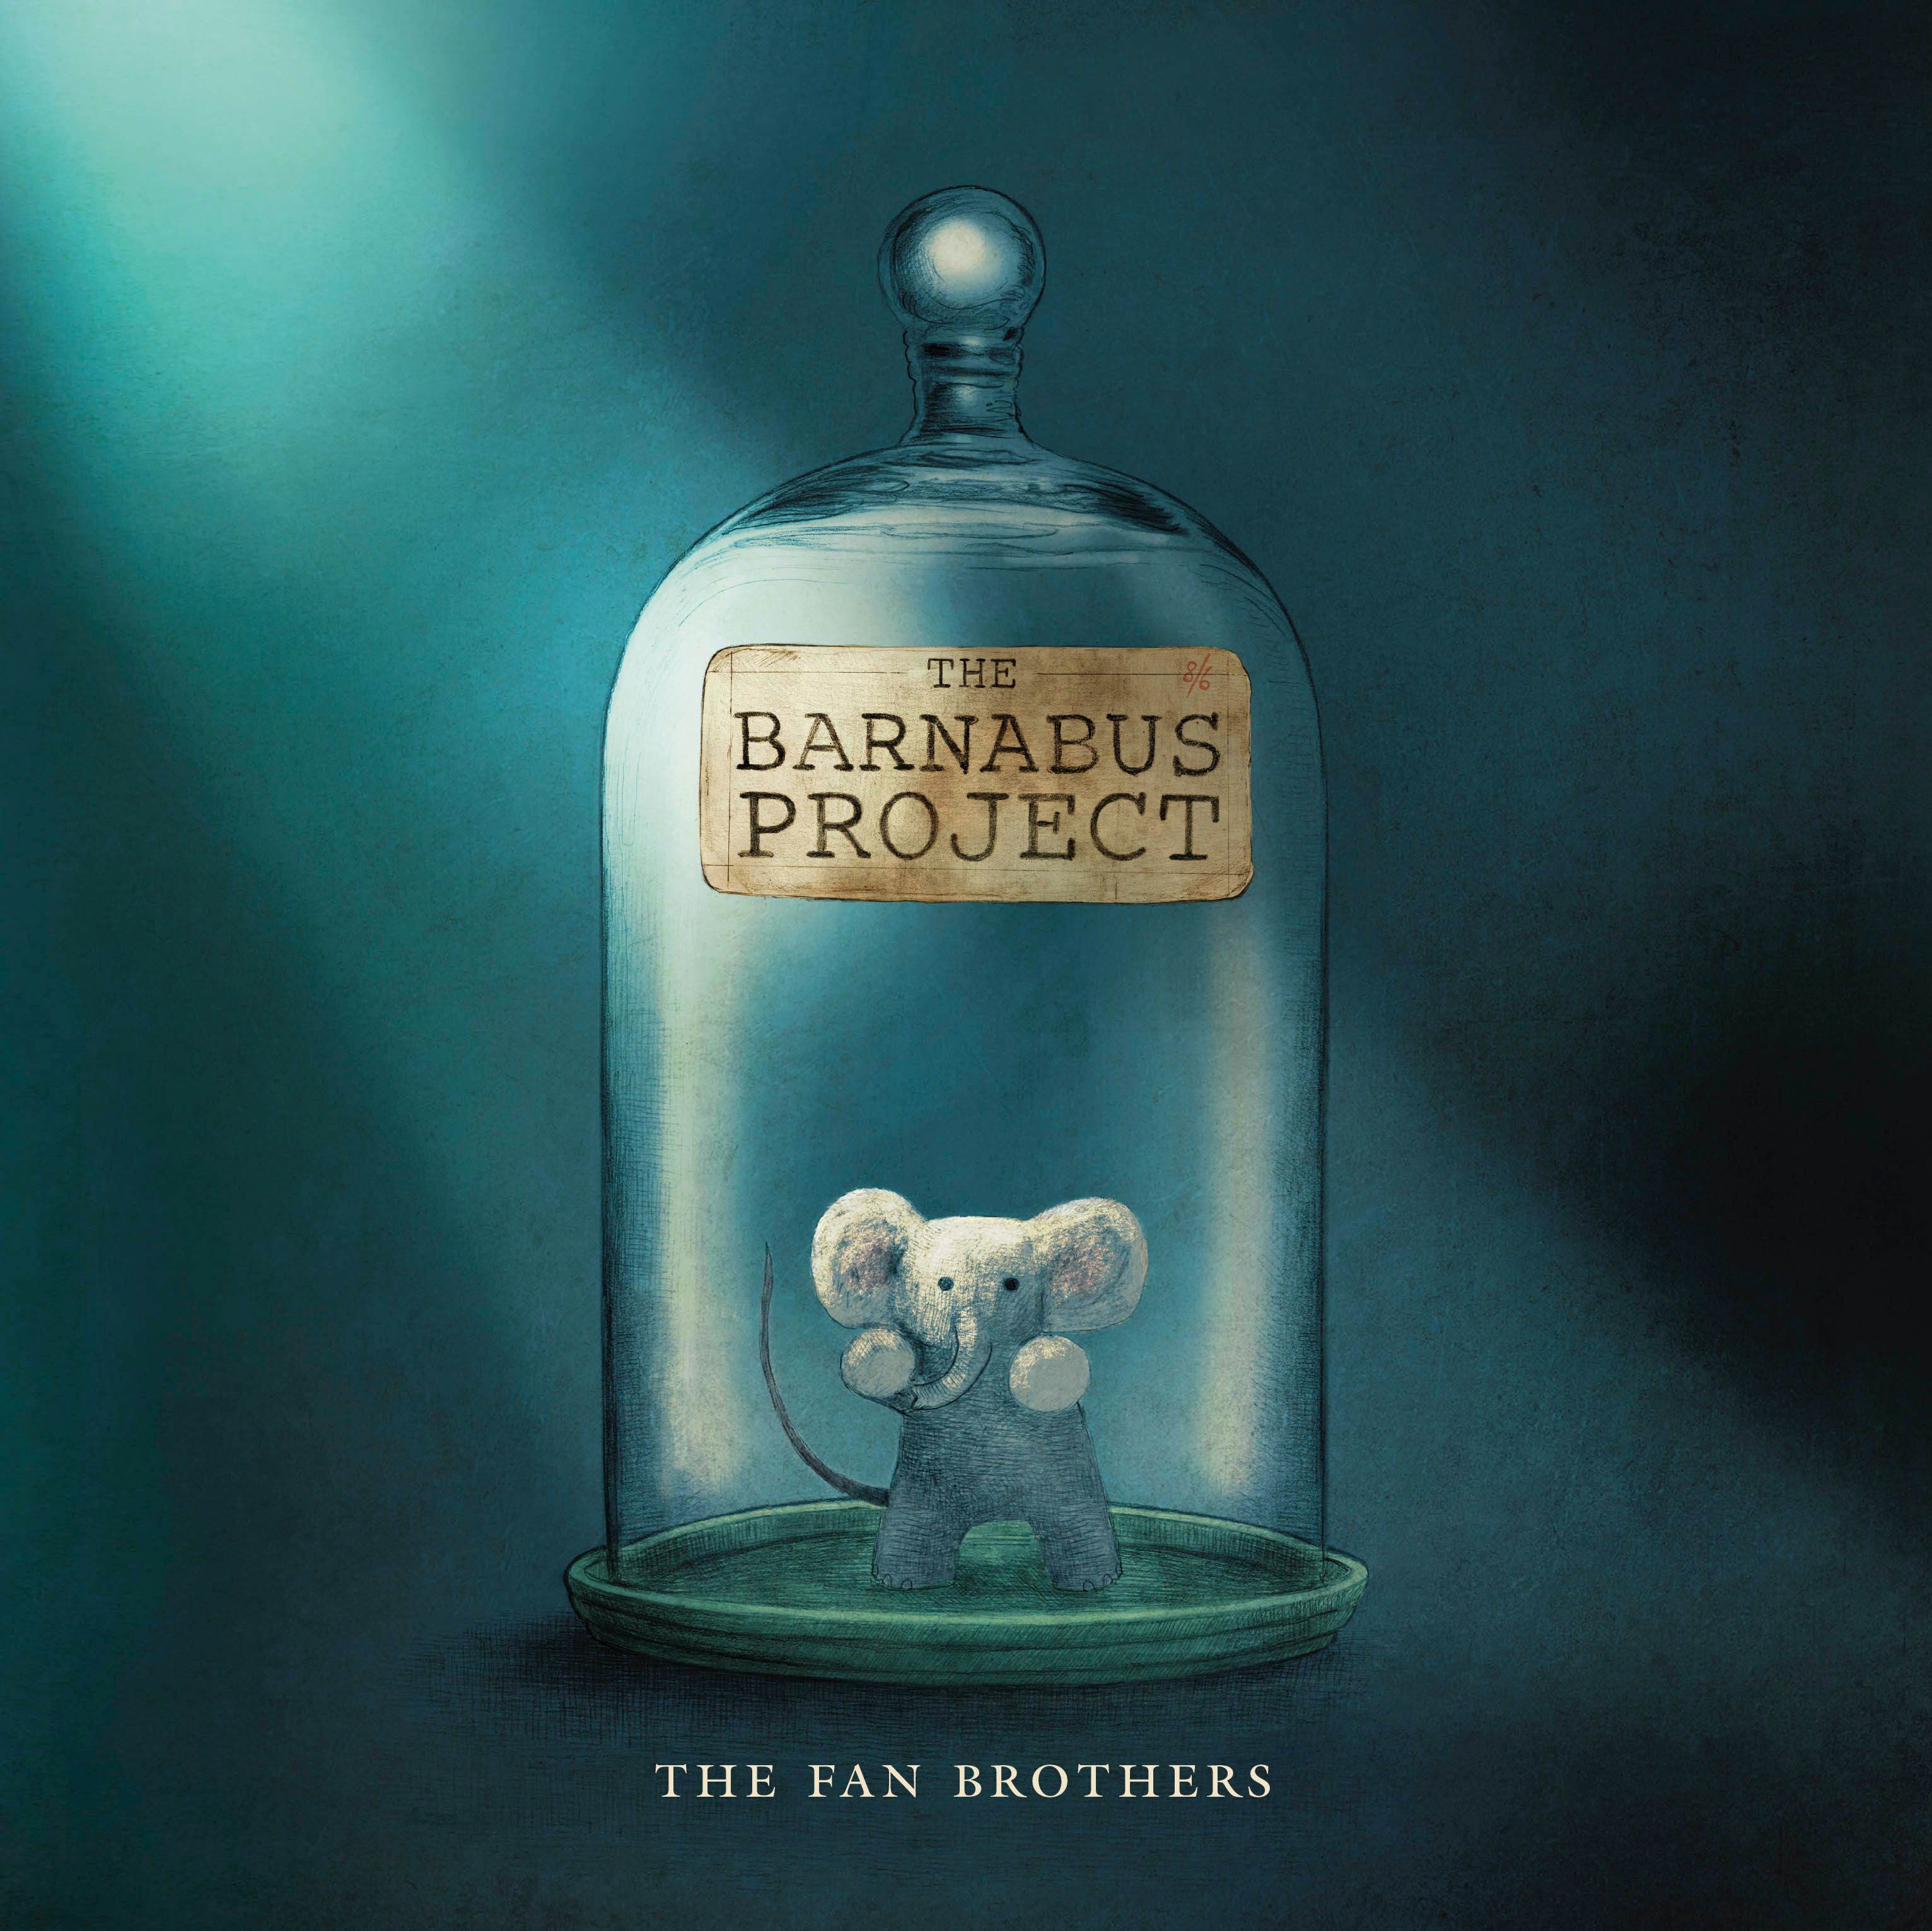 The Barnabus Project by the Fan Brothers book cover